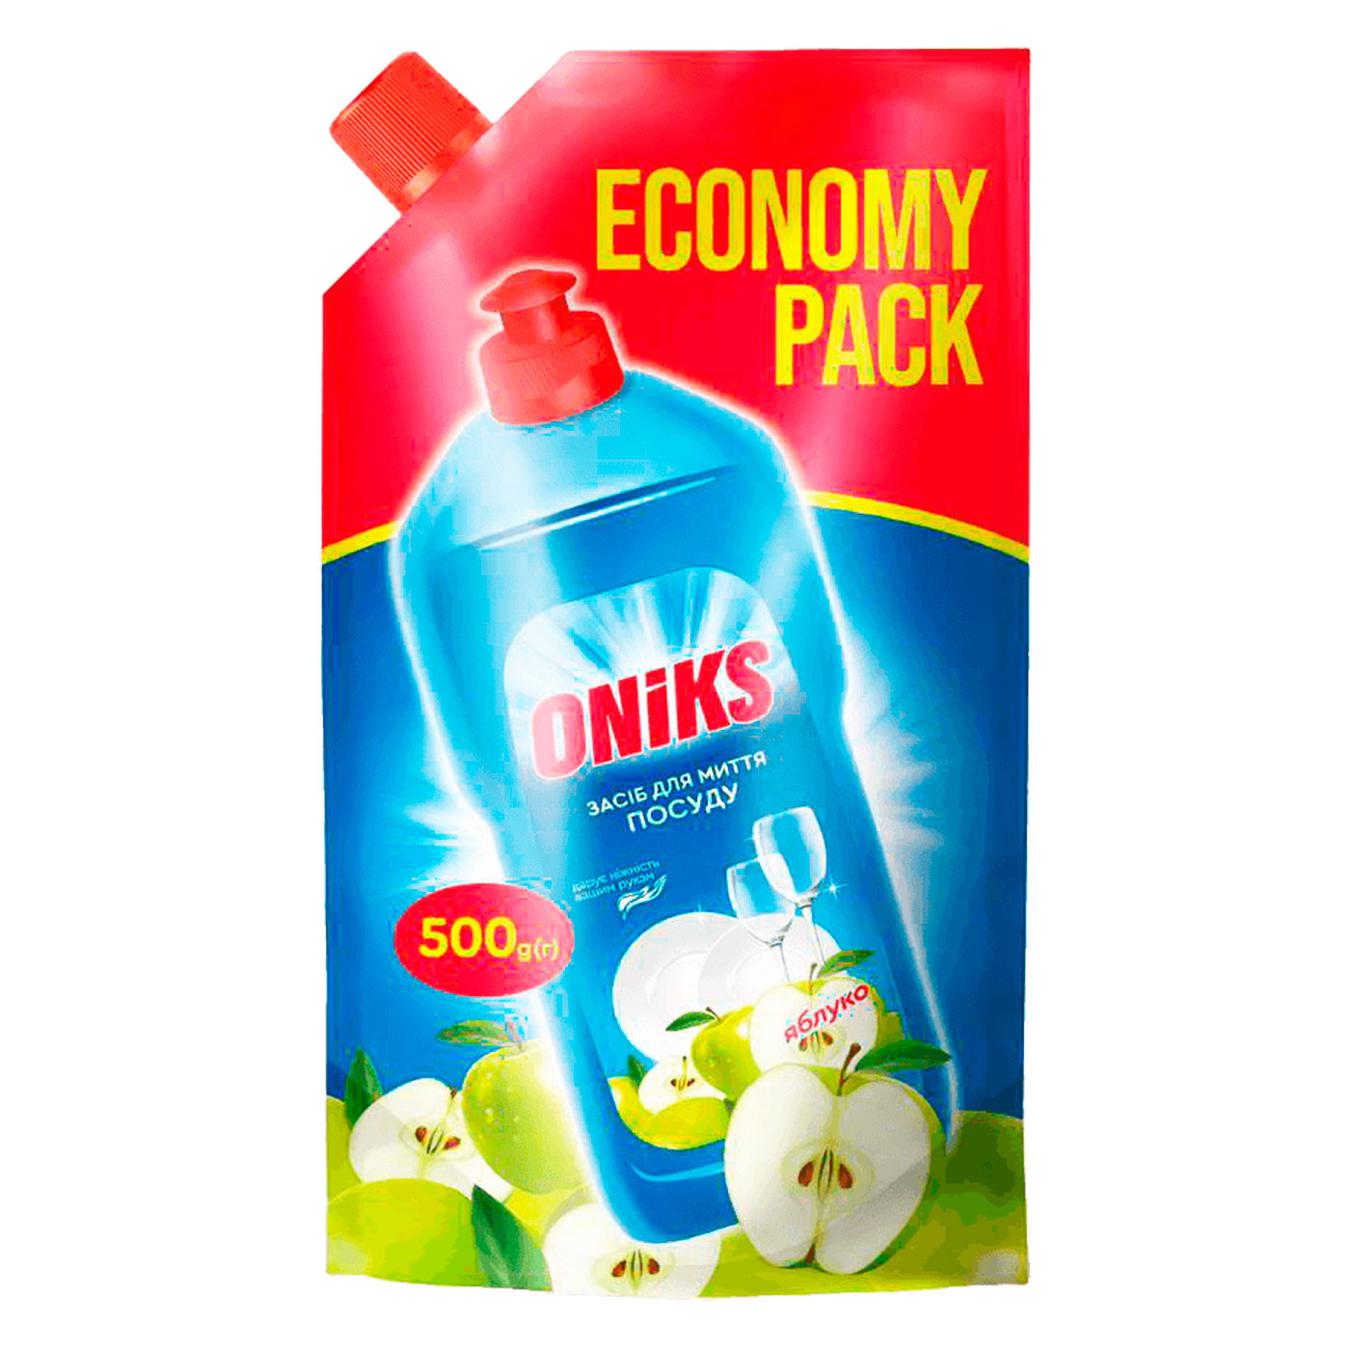 Detergent for washing dishes Oniks green apple doi-pack 500 ml